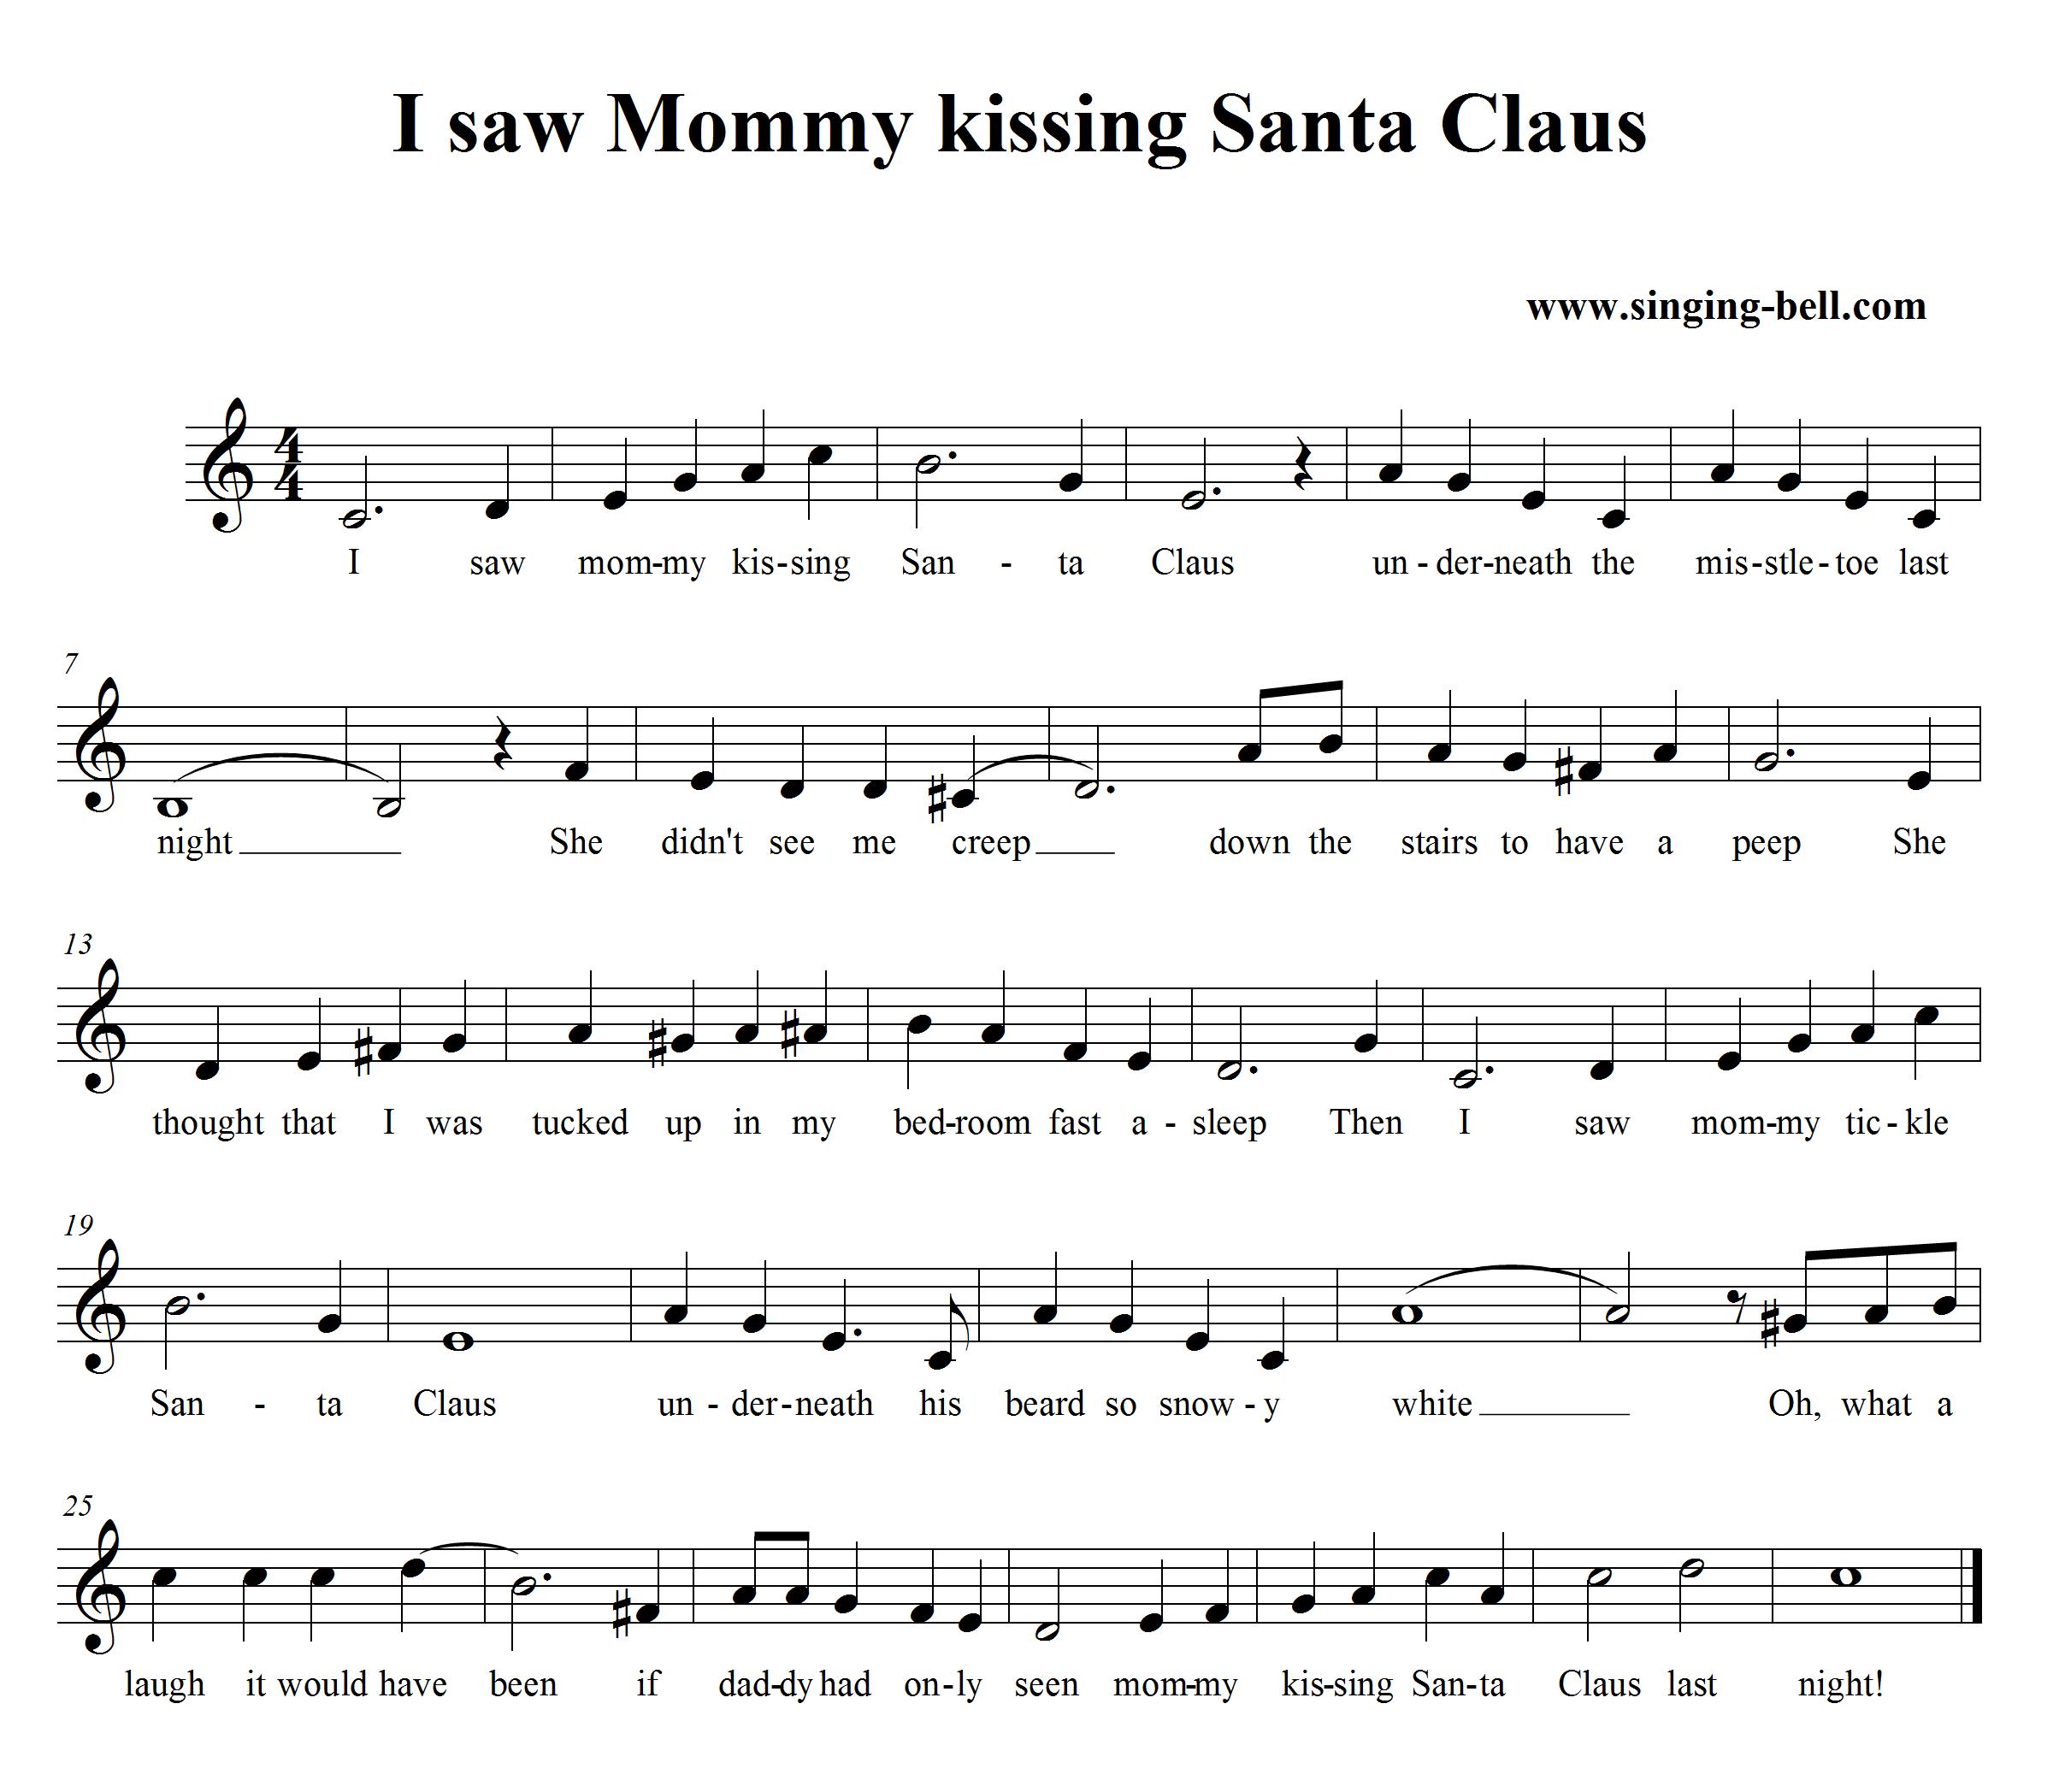 Isaw Mommy Kissing Santa Claus 96